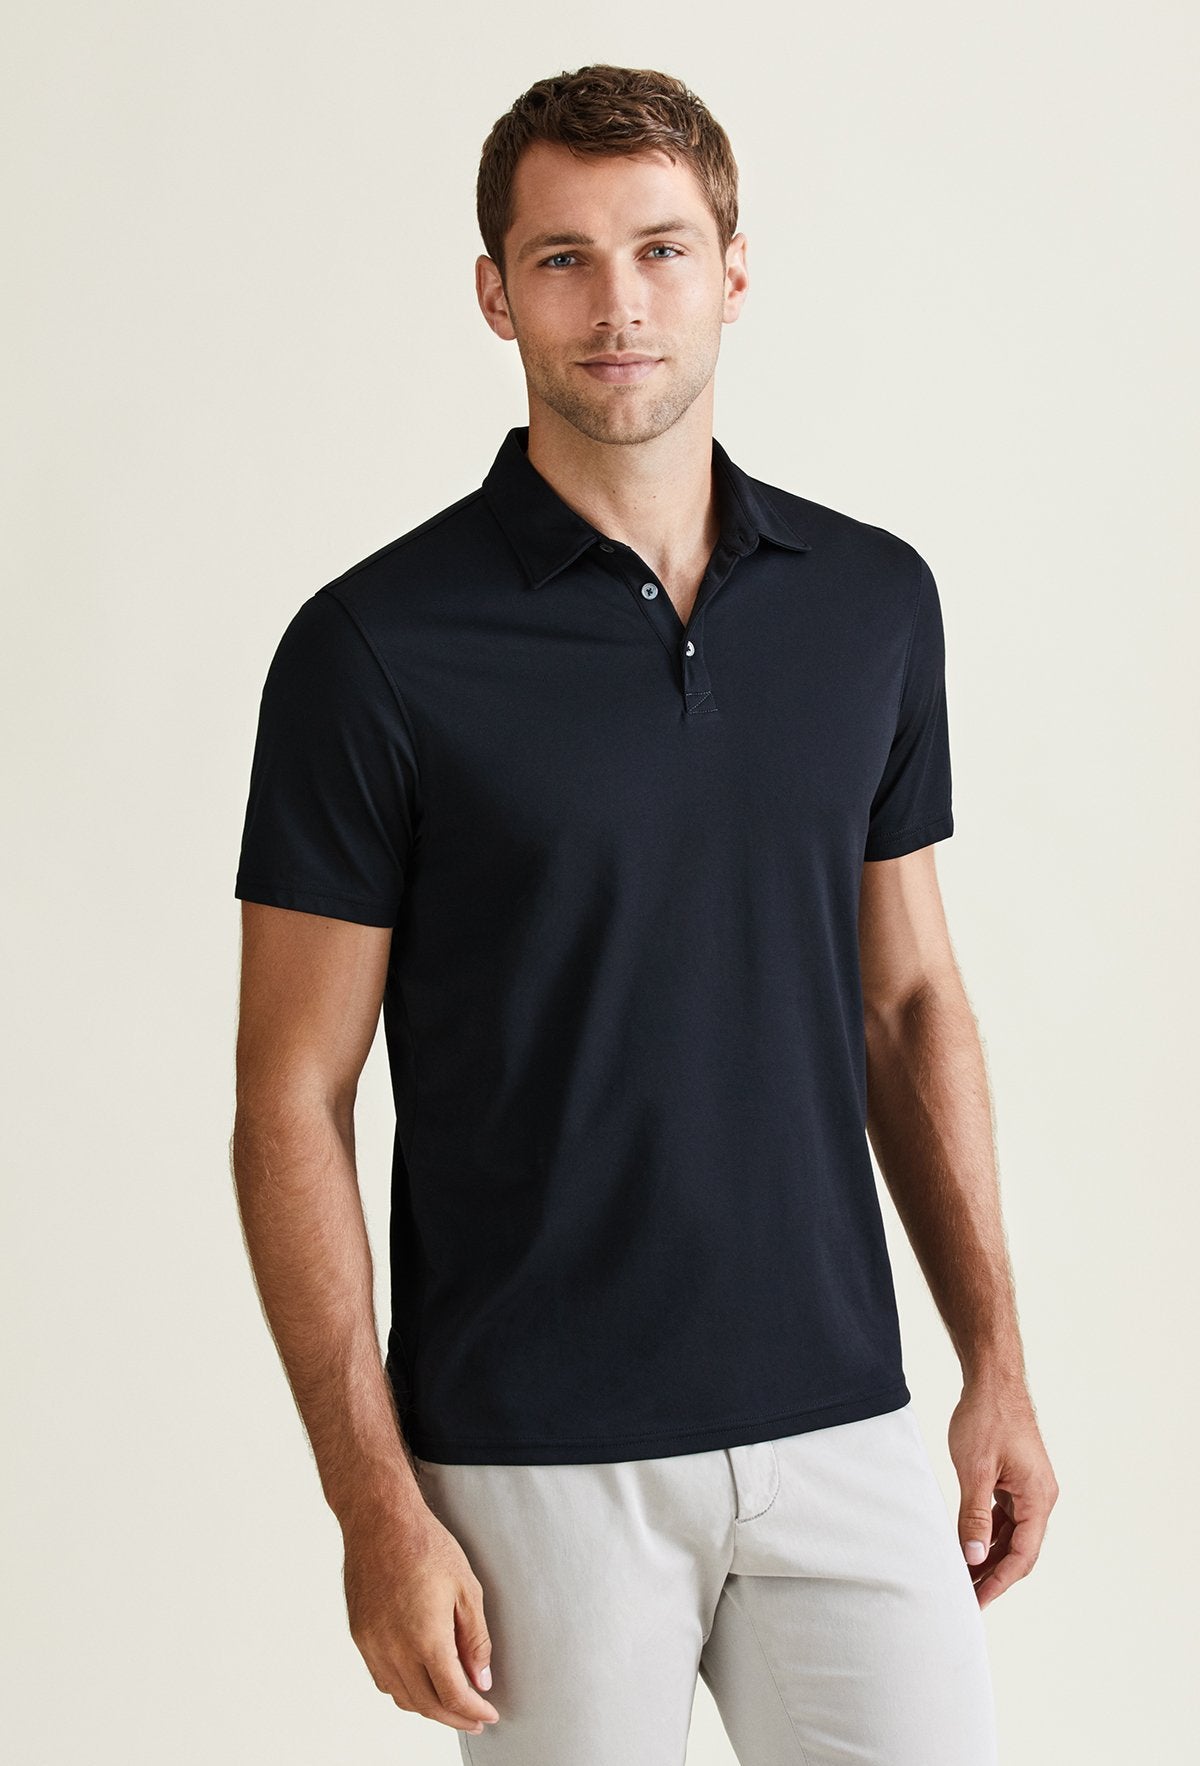 business casual with polo shirt